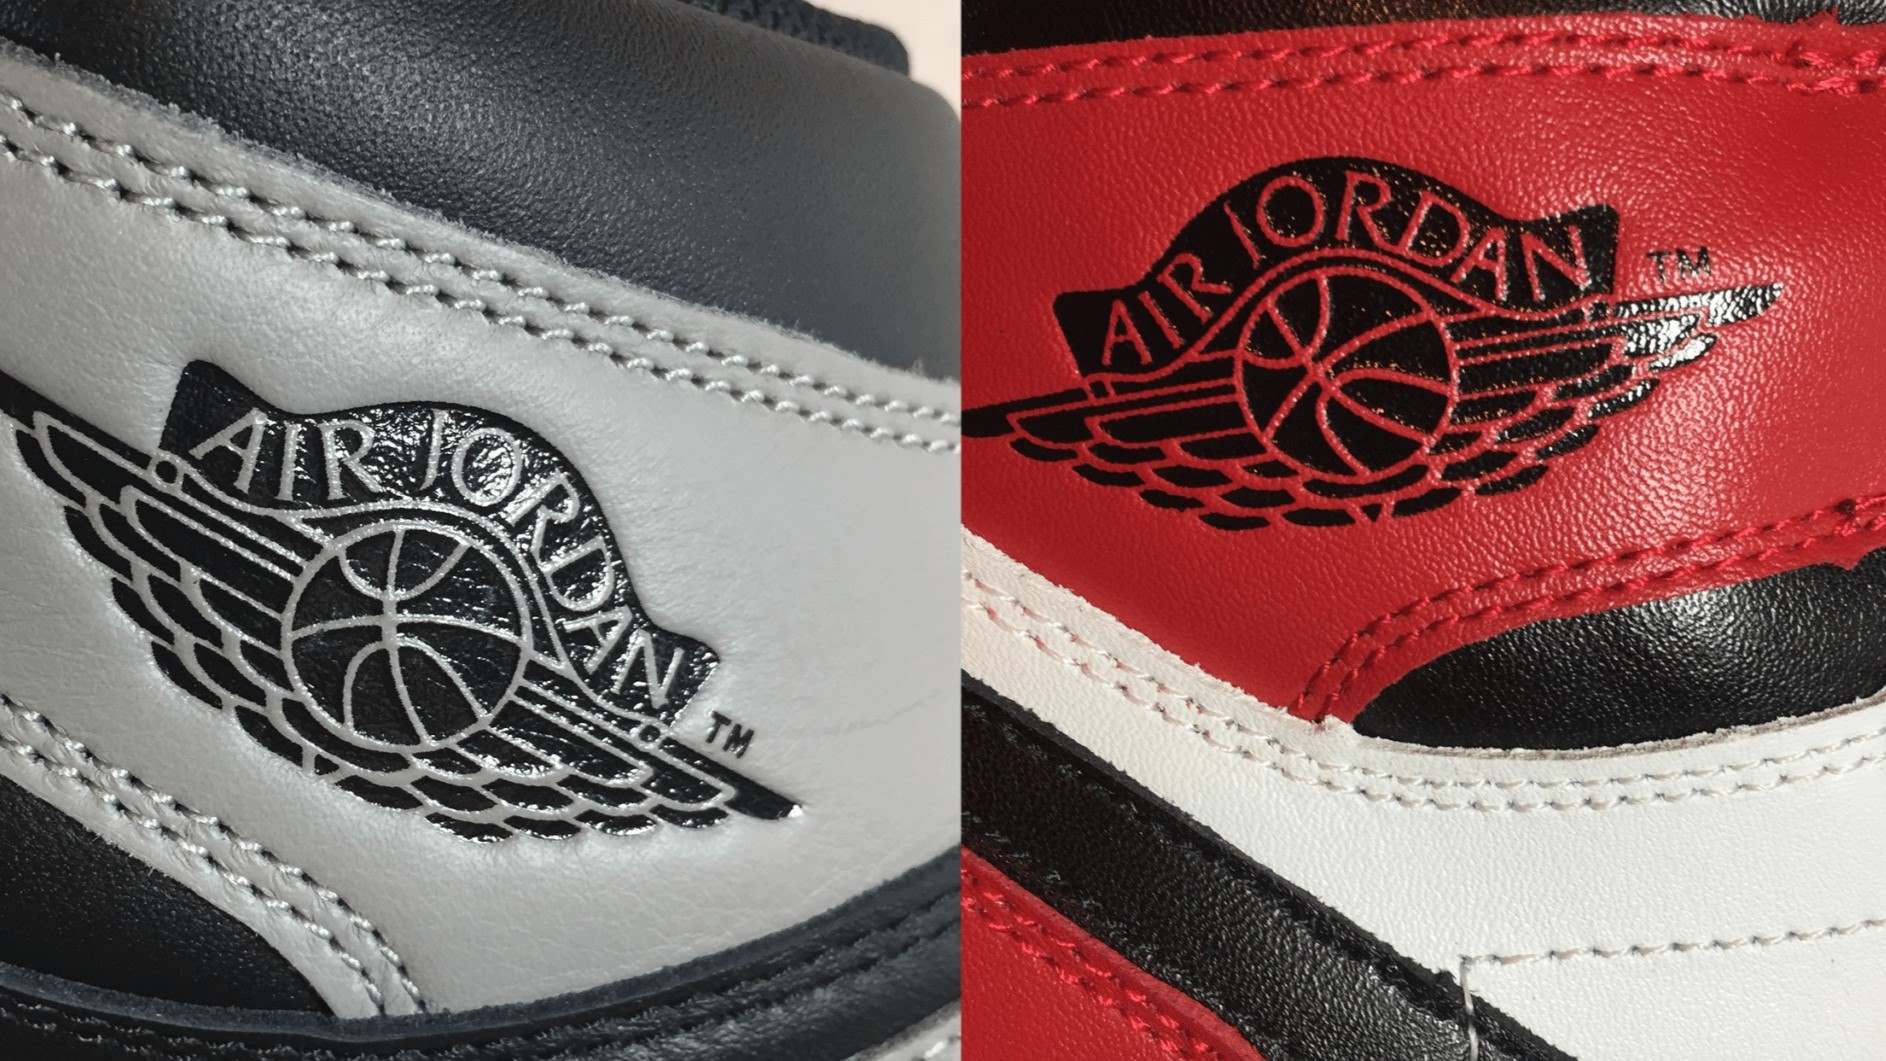 How To Tell If Jordans Are Fake